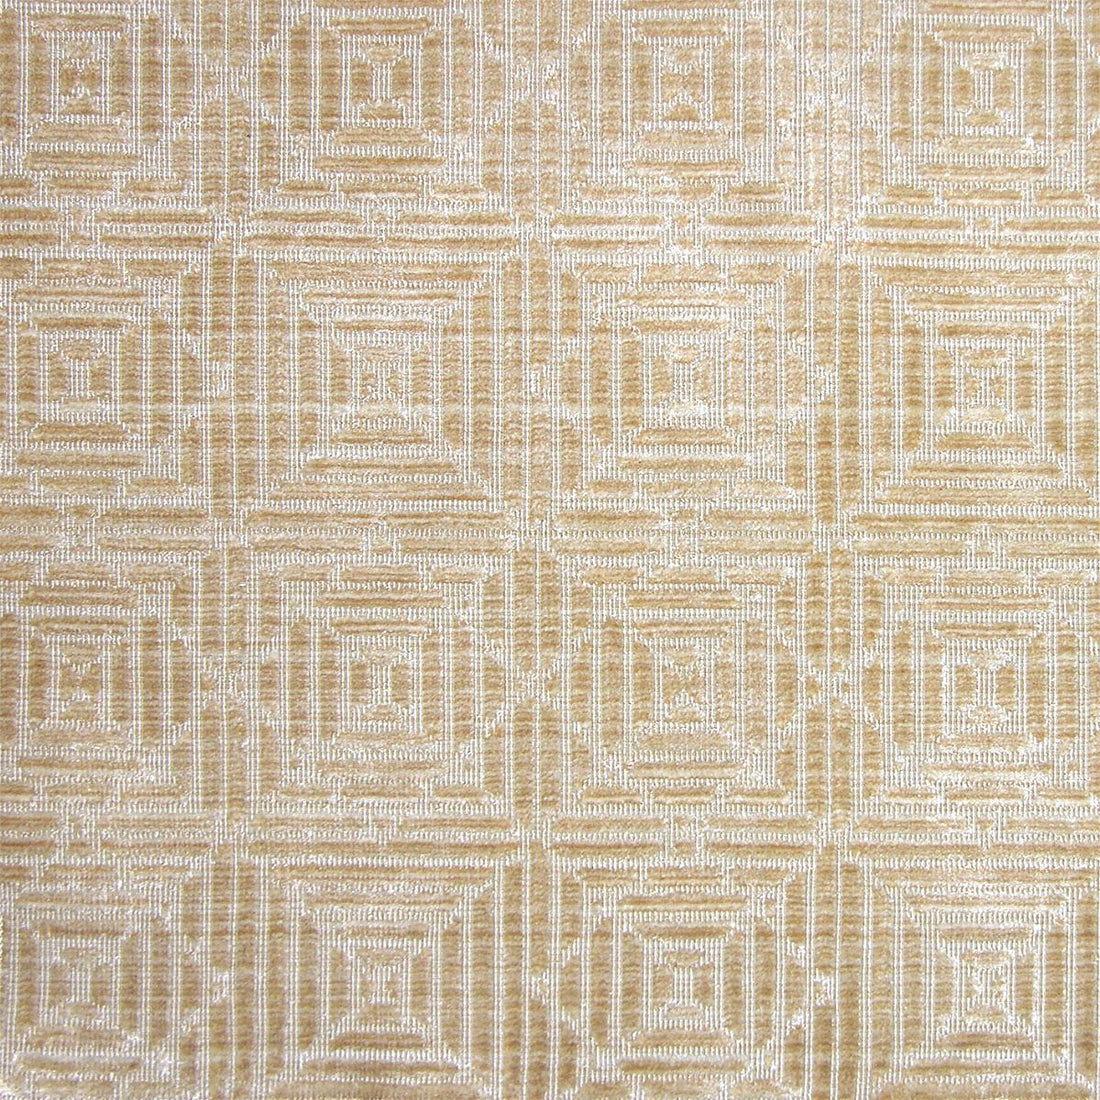 Scherzo fabric in sand color - pattern number GG 00021406 - by Scalamandre in the Old World Weavers collection